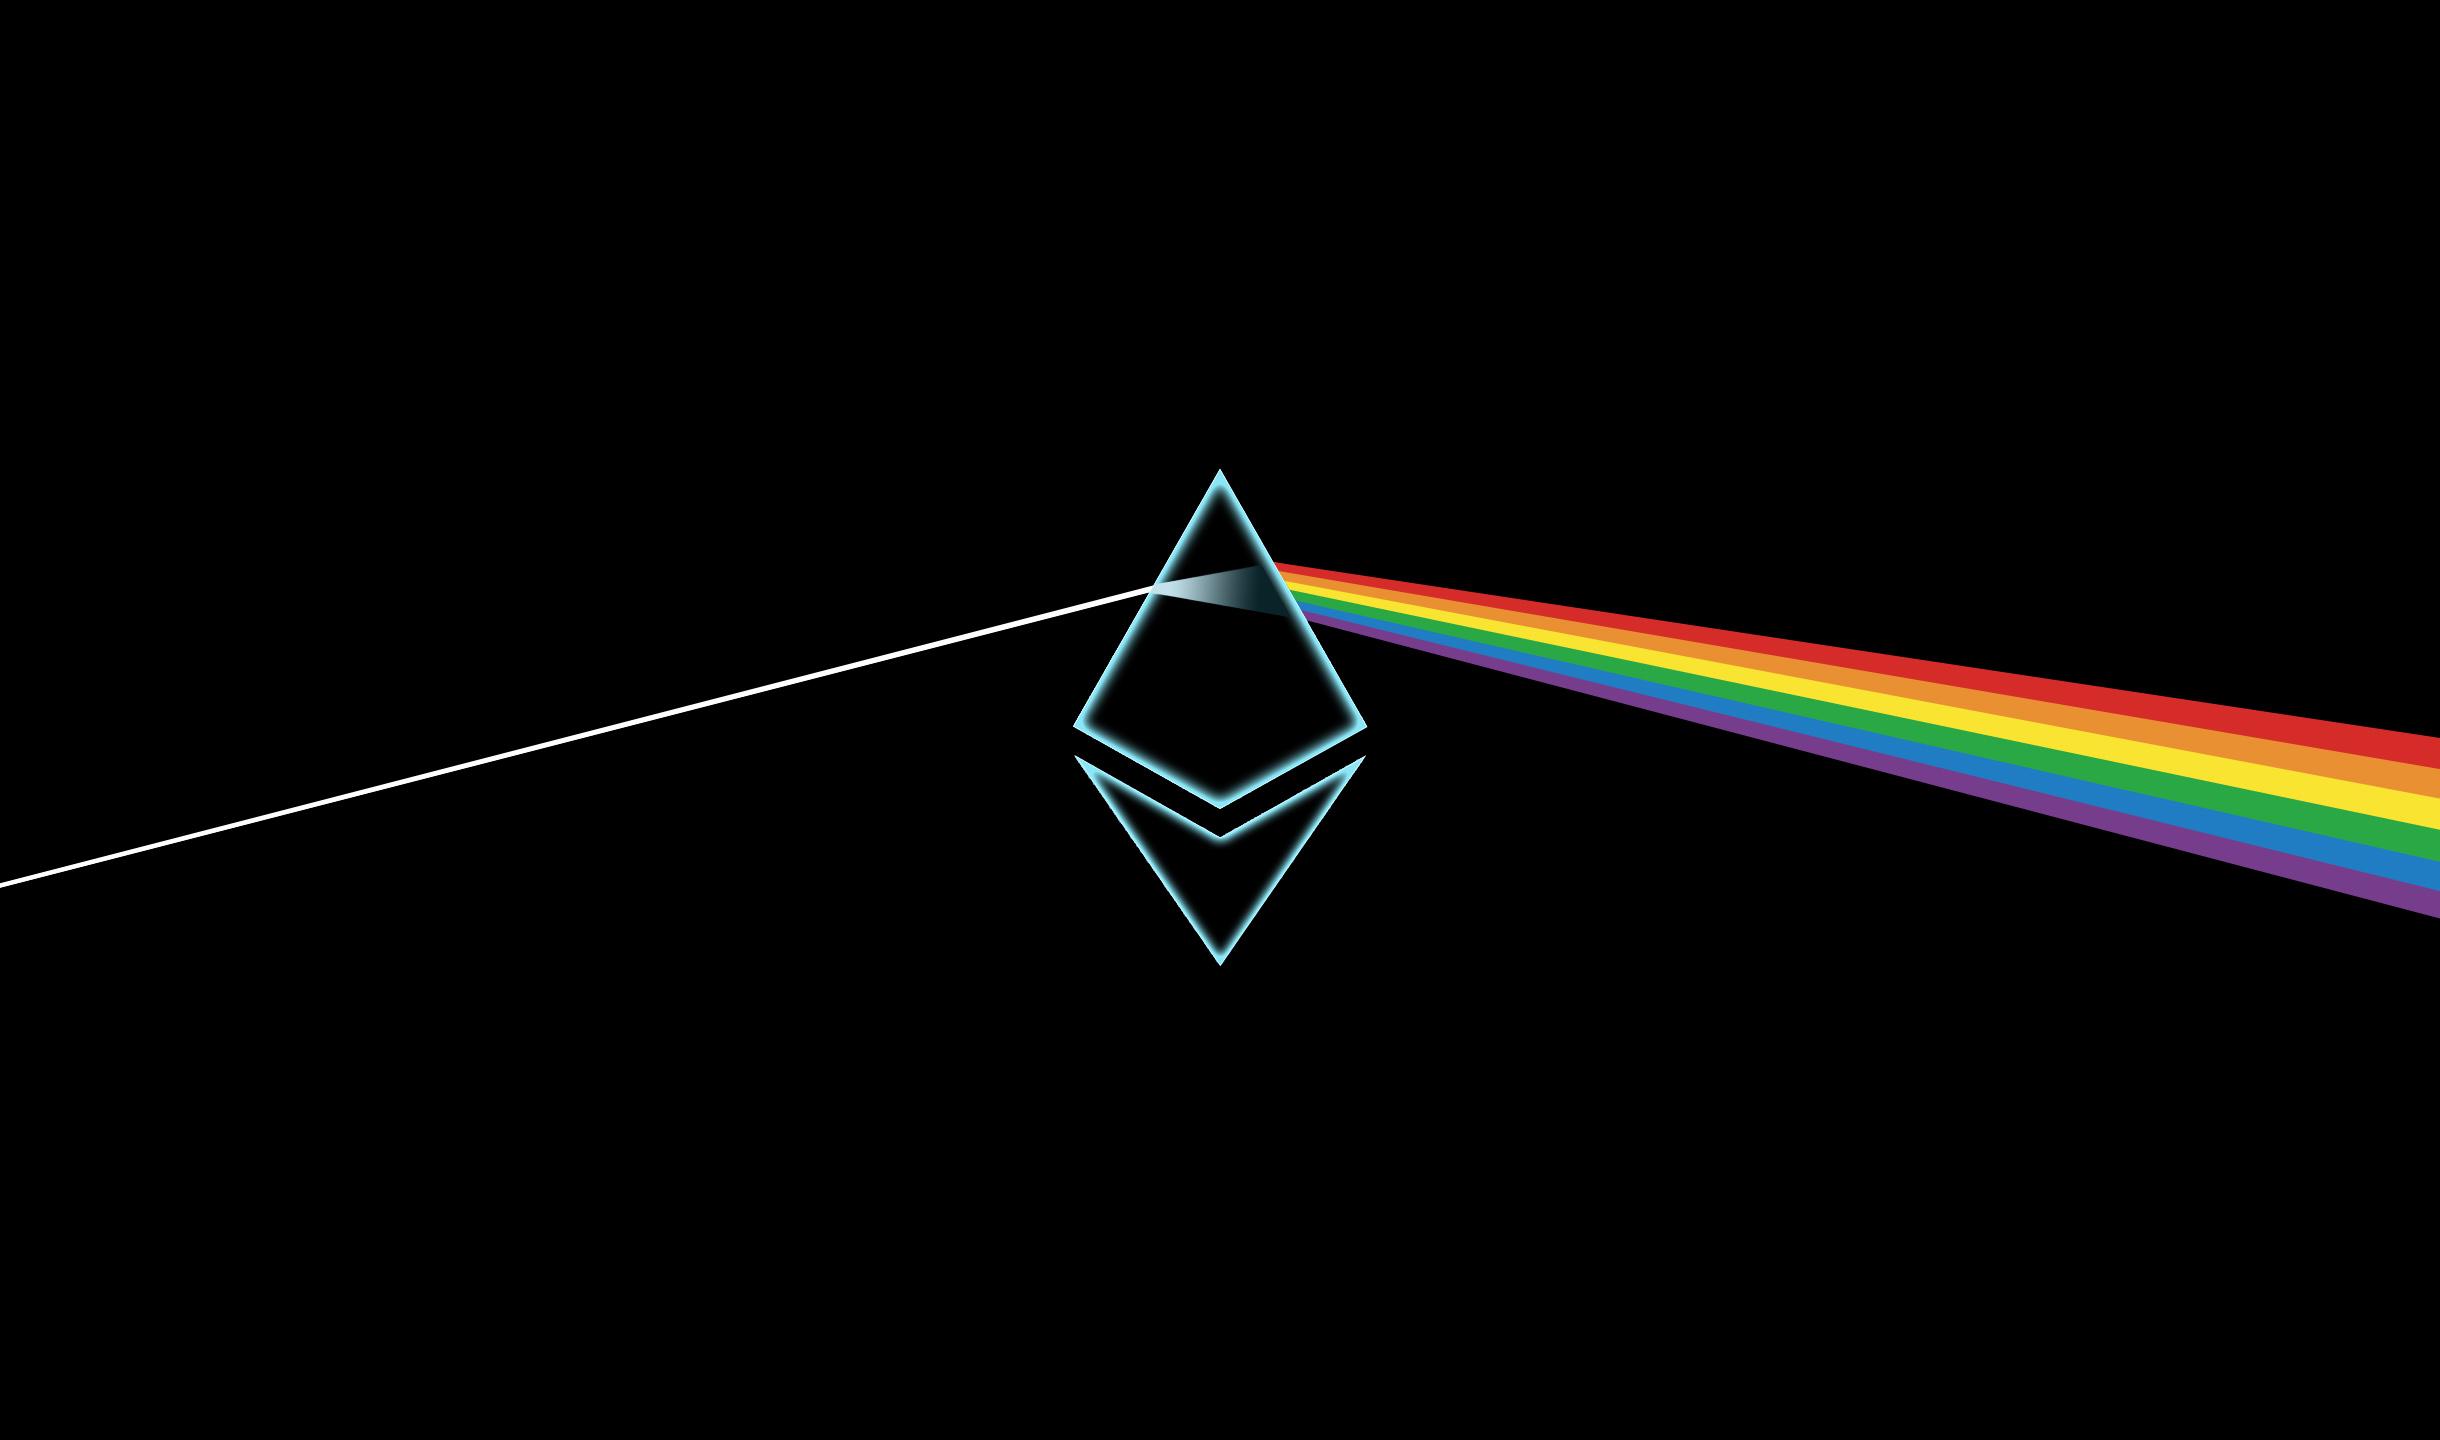 Ethereum background wallpaper image in HD ianjmeikle submitted